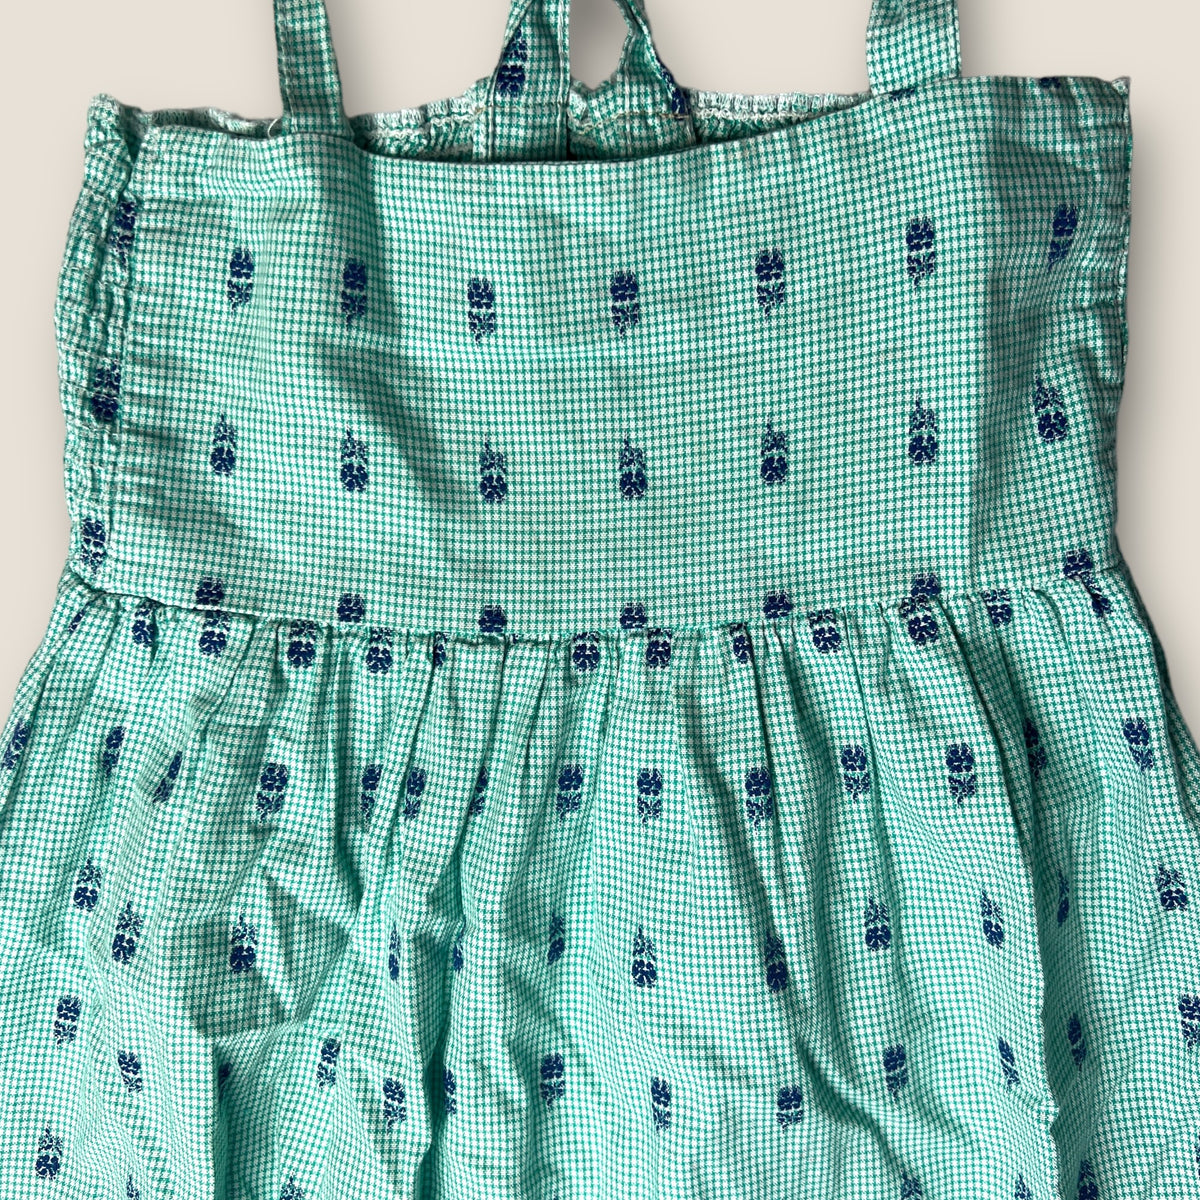 The Campamento Dress size 5-6 years